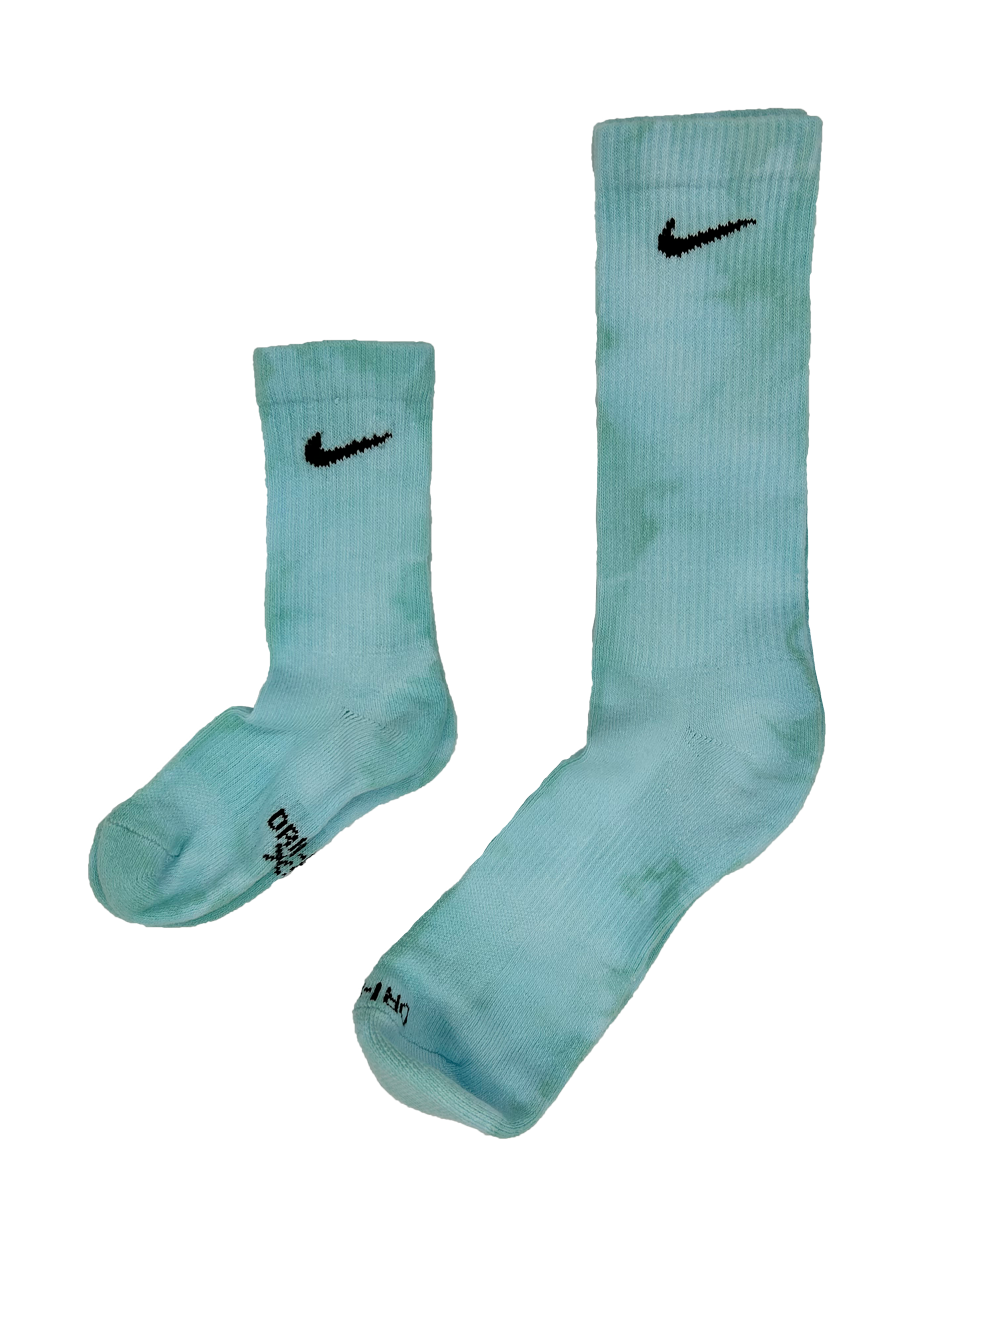 You're My Earth - Teal and Green Hand Dyed Nike Crew Socks - Tie Dye Ocean Colors